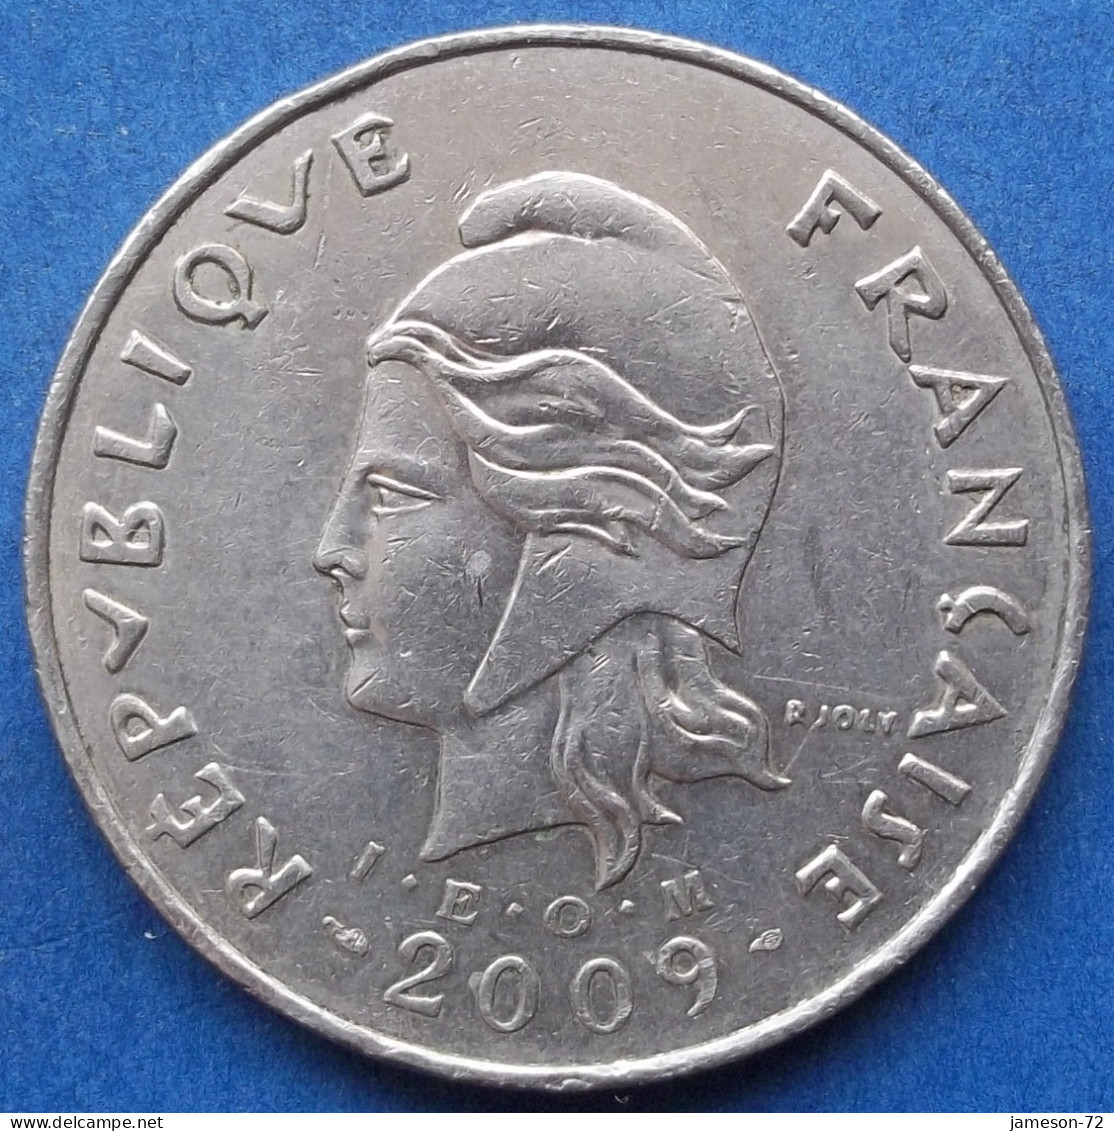 NEW CALEDONIA - 50 Francs 2009 "Hut" KM# 13 French Associated State (1998) - Edelweiss Coins - Nieuw-Caledonië